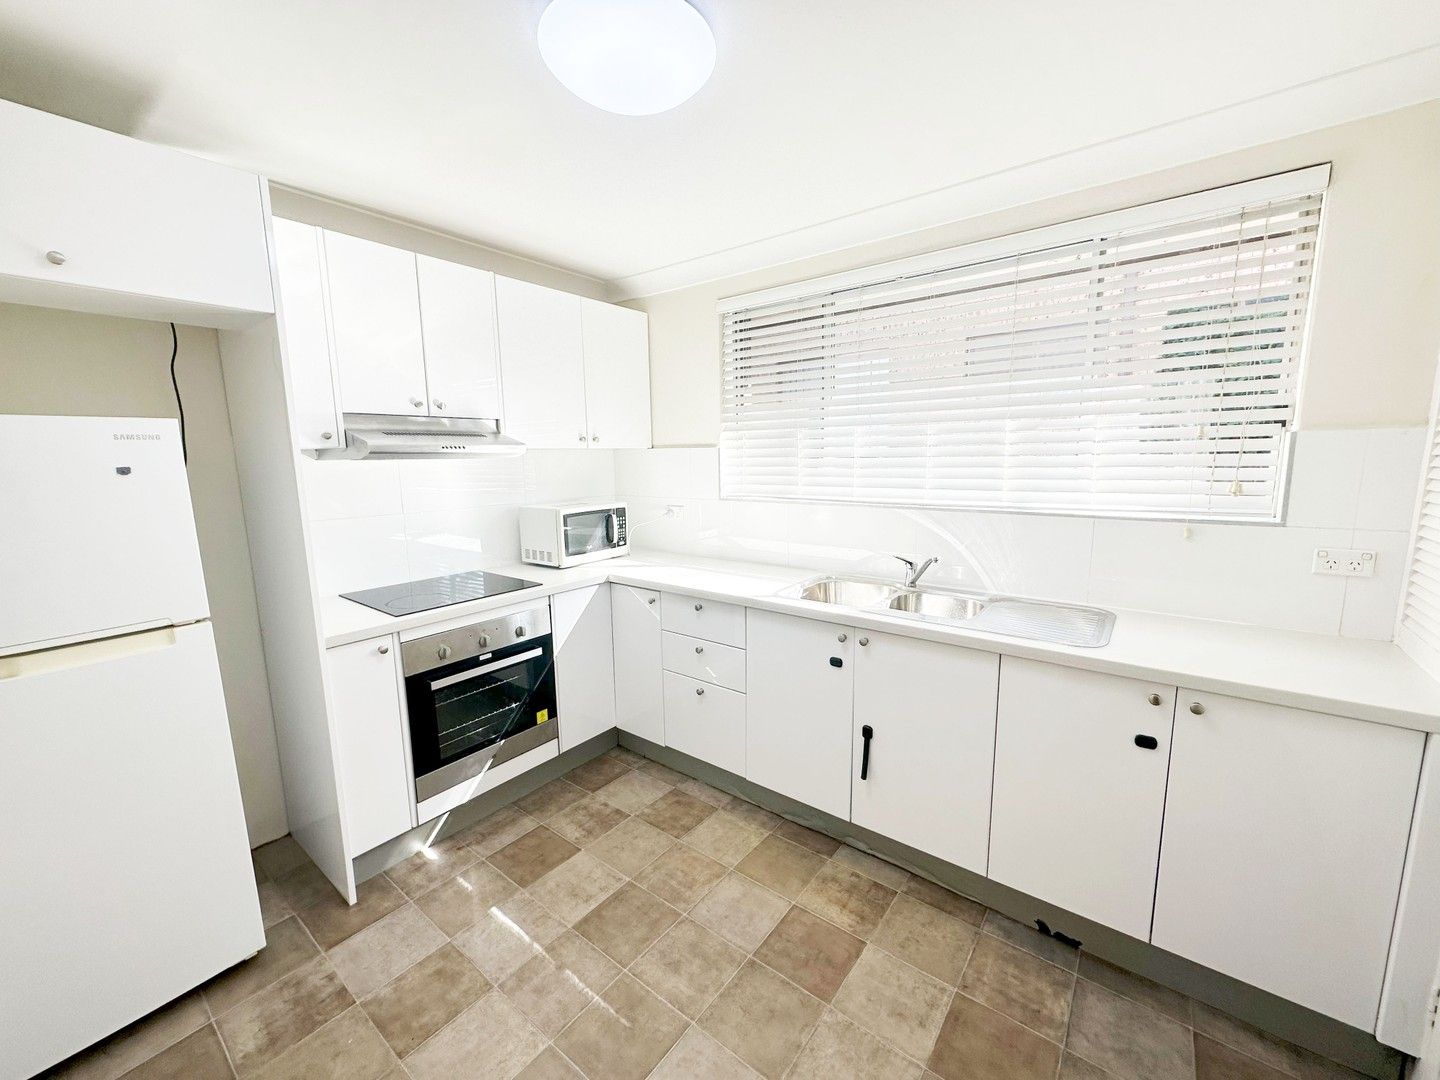 2 bedrooms Apartment / Unit / Flat in Railway Parade WESTMEAD NSW, 2145